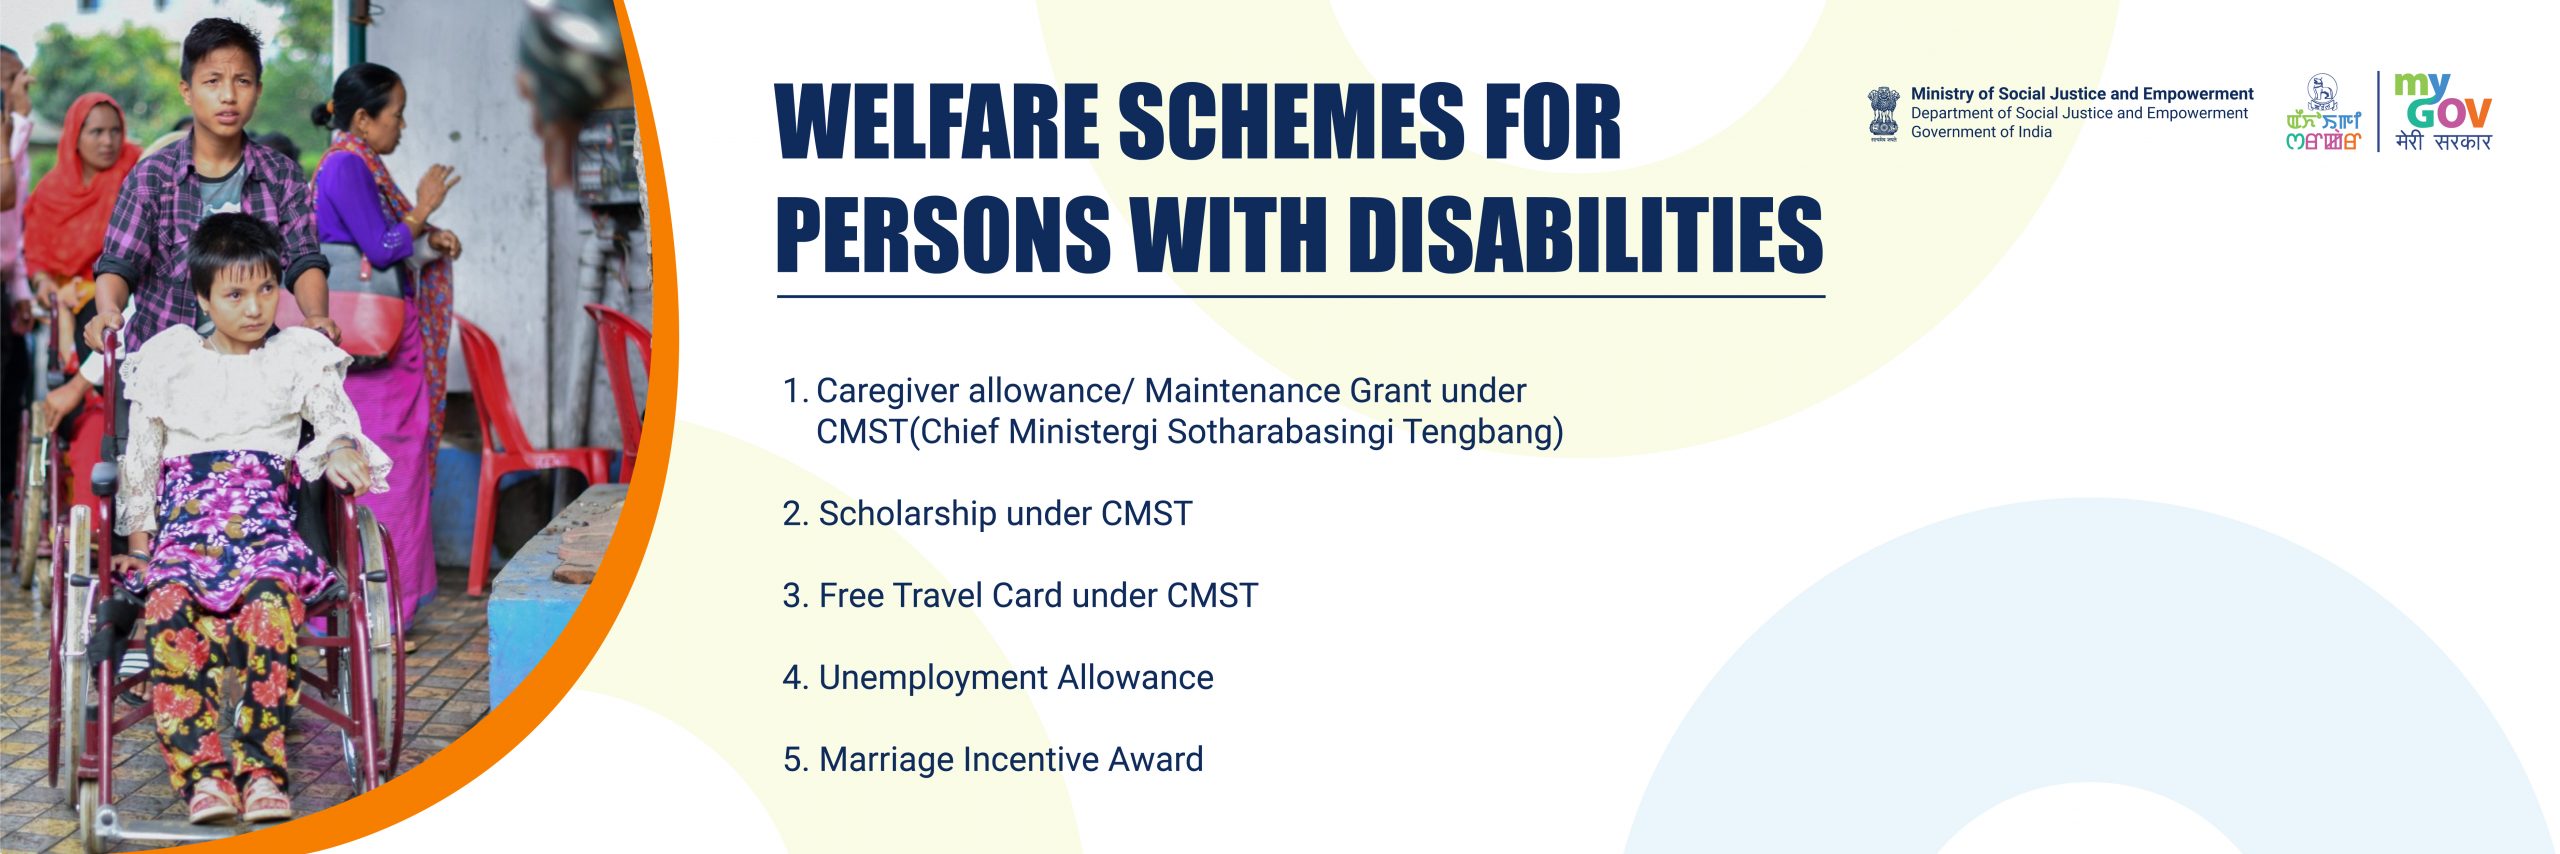 welfare-schemes-for-persons-with-disabilities-mygov-blogs